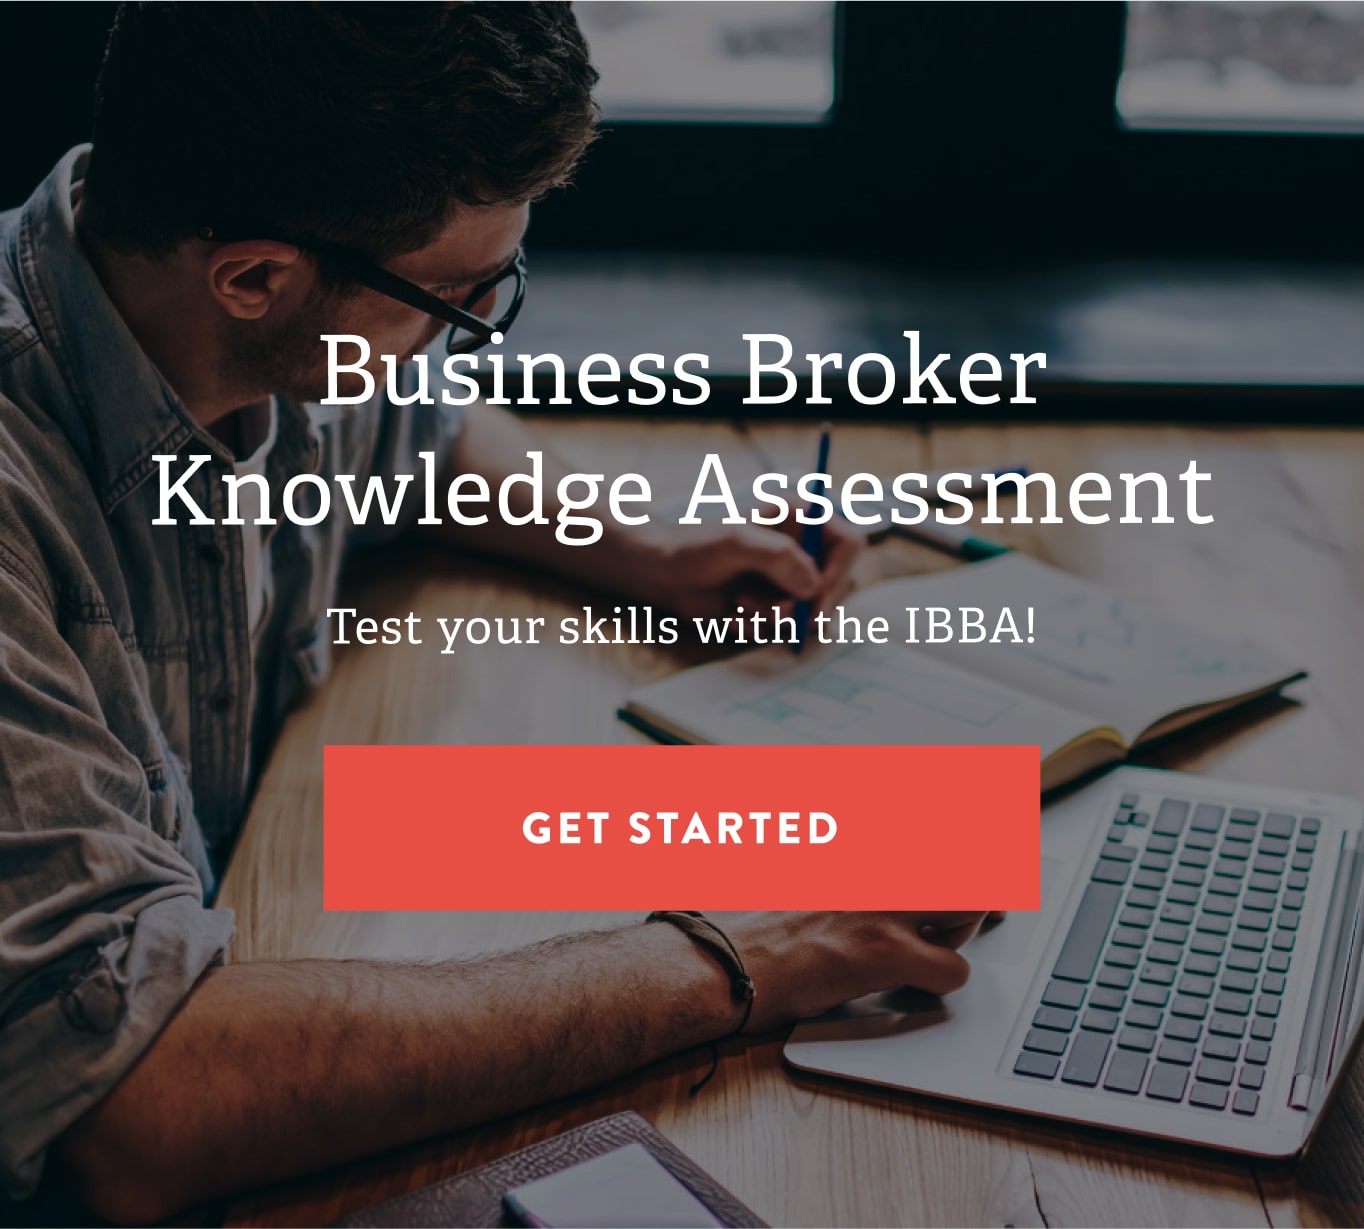 Test your skills with the IBBA! Get started button